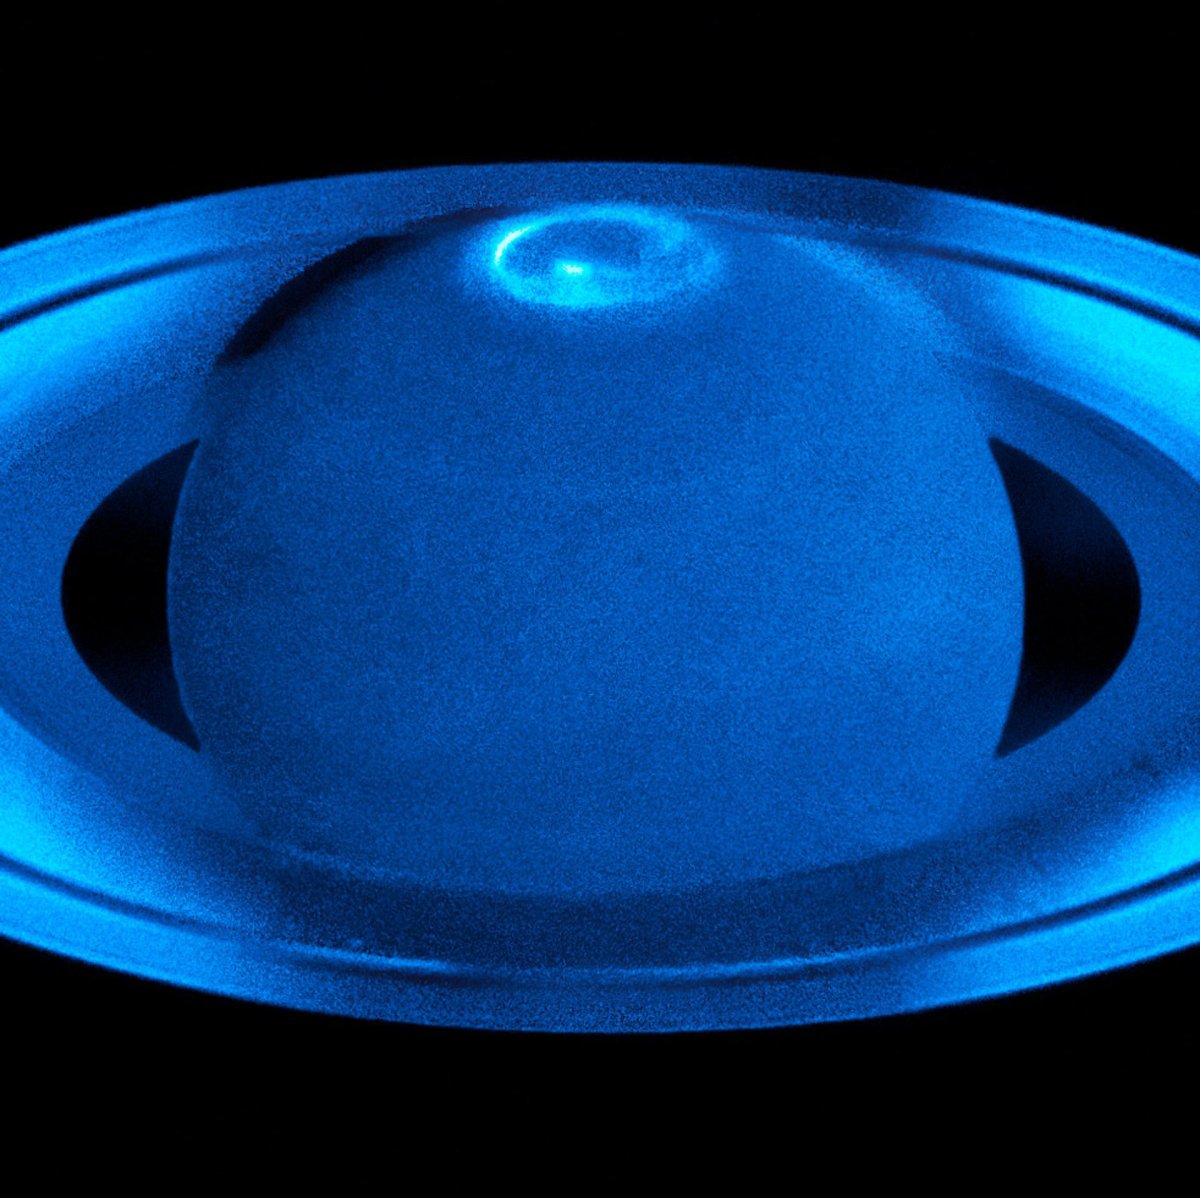 Hubble Captures Enormous Northern Auroras on Saturn